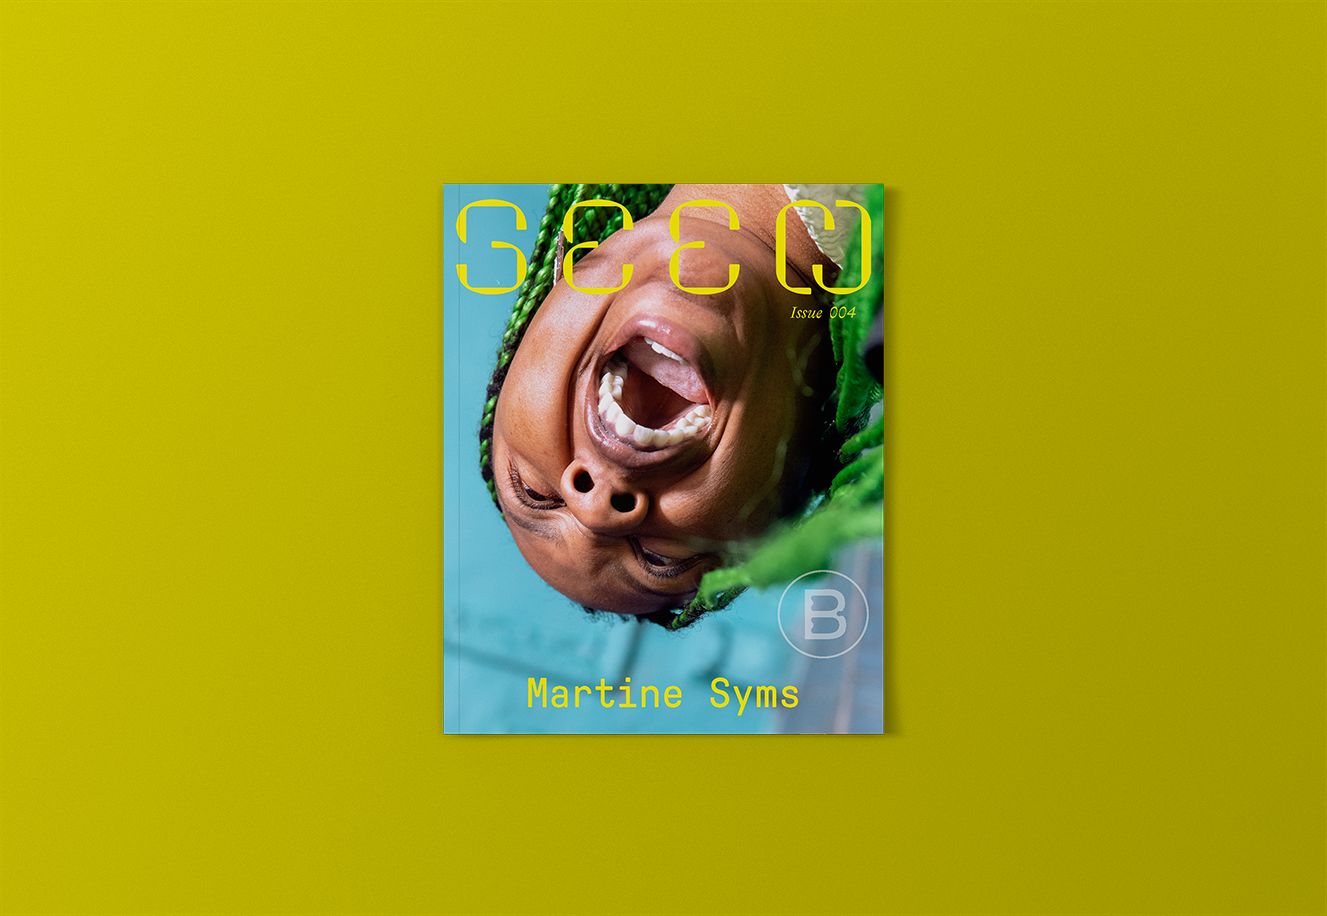 Seen 004 cover image. Order and subscribe. A black closeup image of a Black woman with her mouth is open. She has neon green braids and is photographed against a neon blue background. The cover title and text is rendered in neon green.